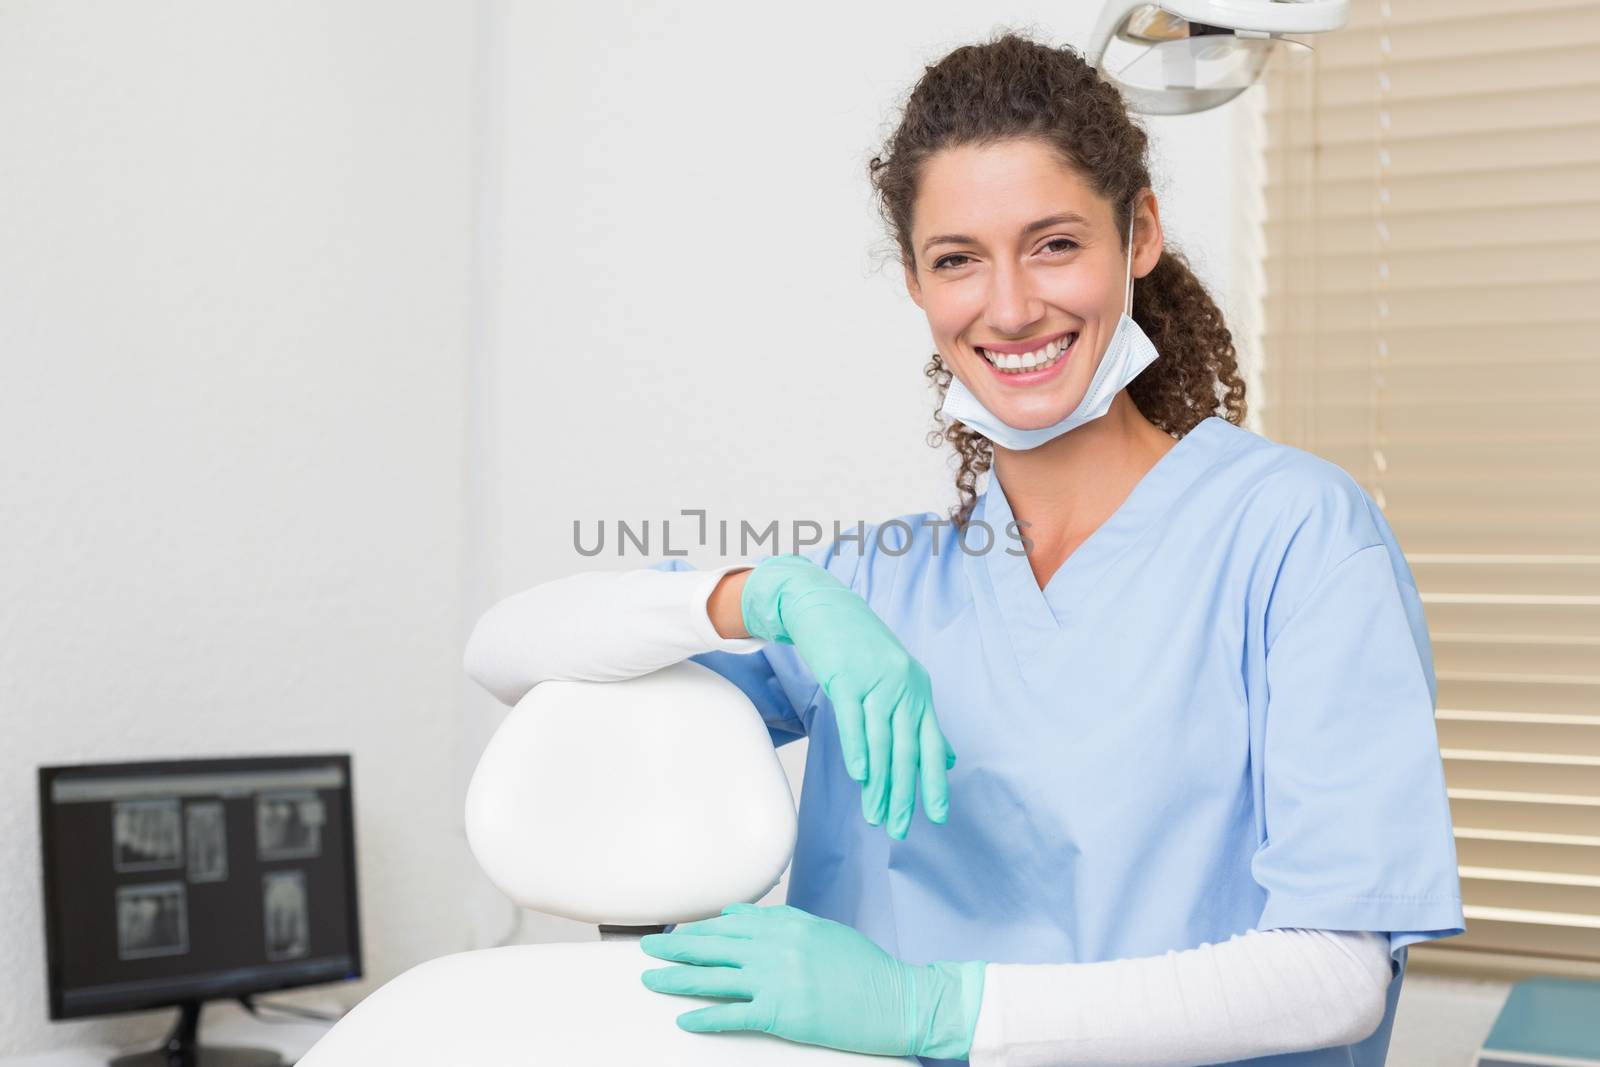 Dentist in blue scrubs smiling at camera at the dental clinic